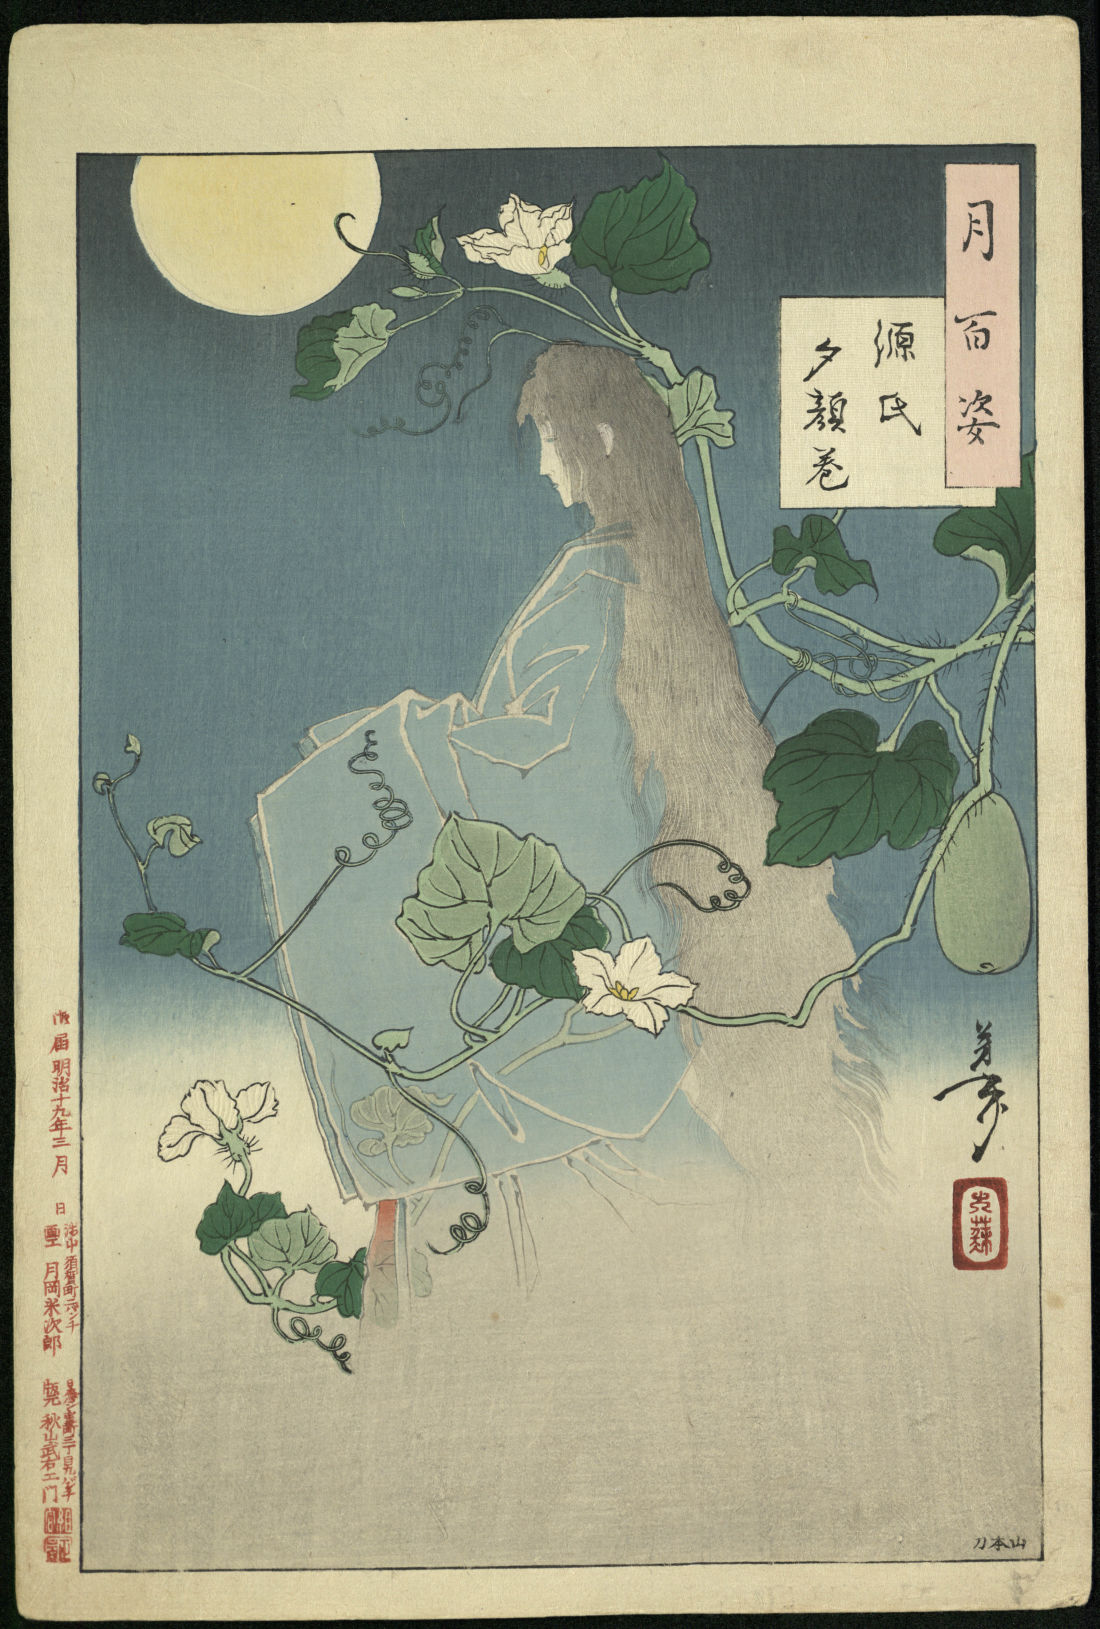 A character from the Tale of Genji depicted looking at the moon, wearing a blue robe